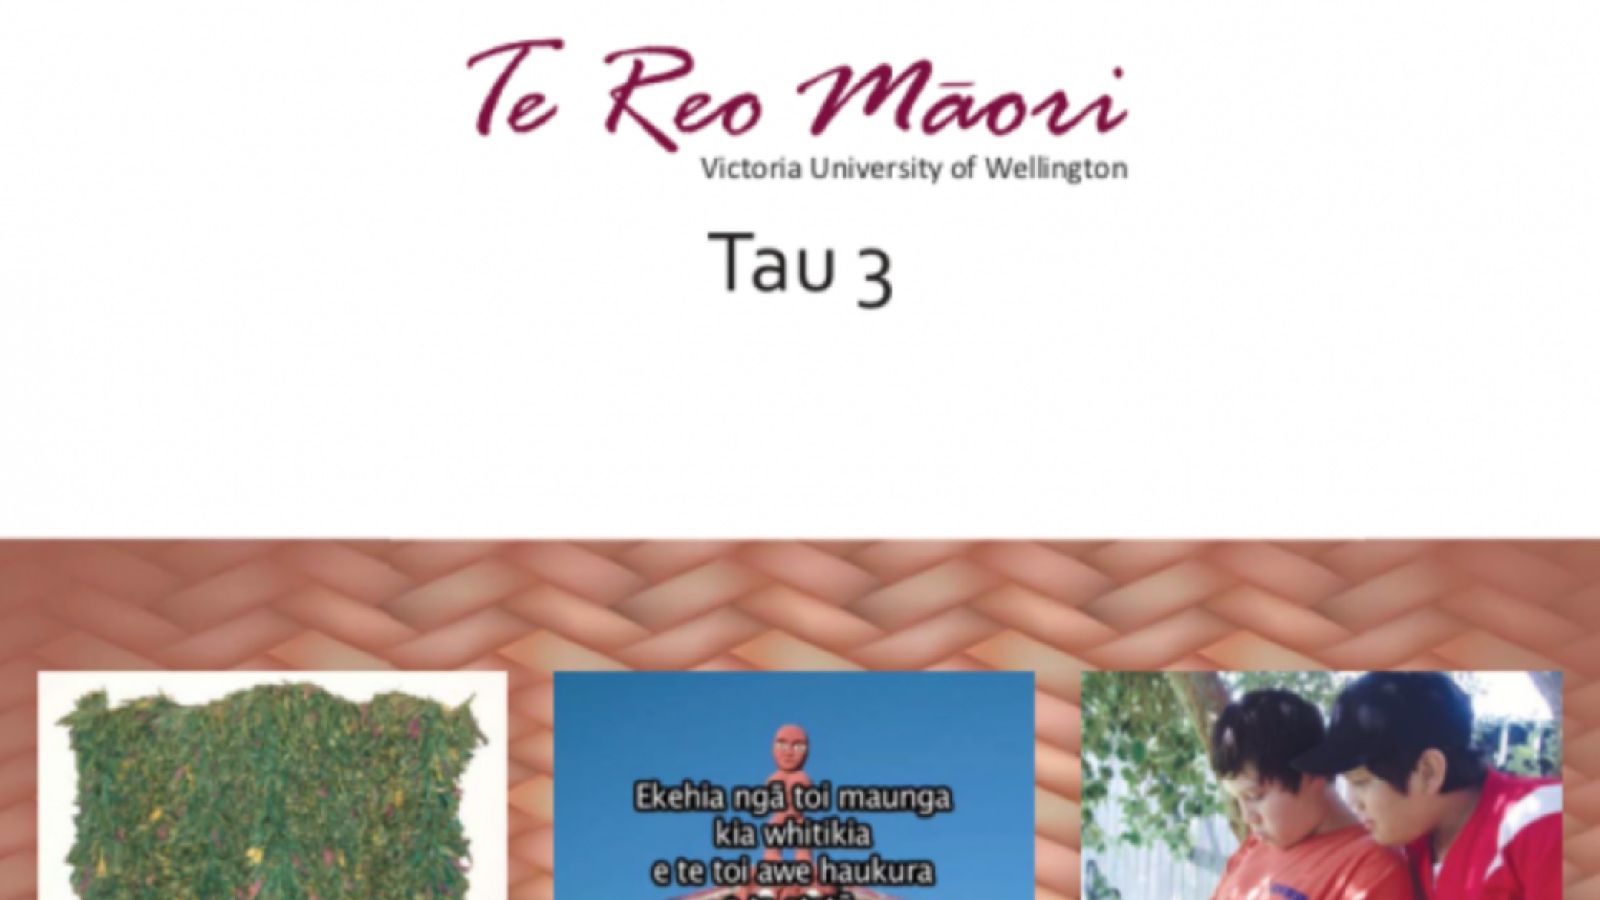 Te reo Māori e-book with three images on the front: one is a green bush with yellow flowers, the second is a photo of the tekoteko on top of a marae, and the third is of two boys looking down at something we cannot see.